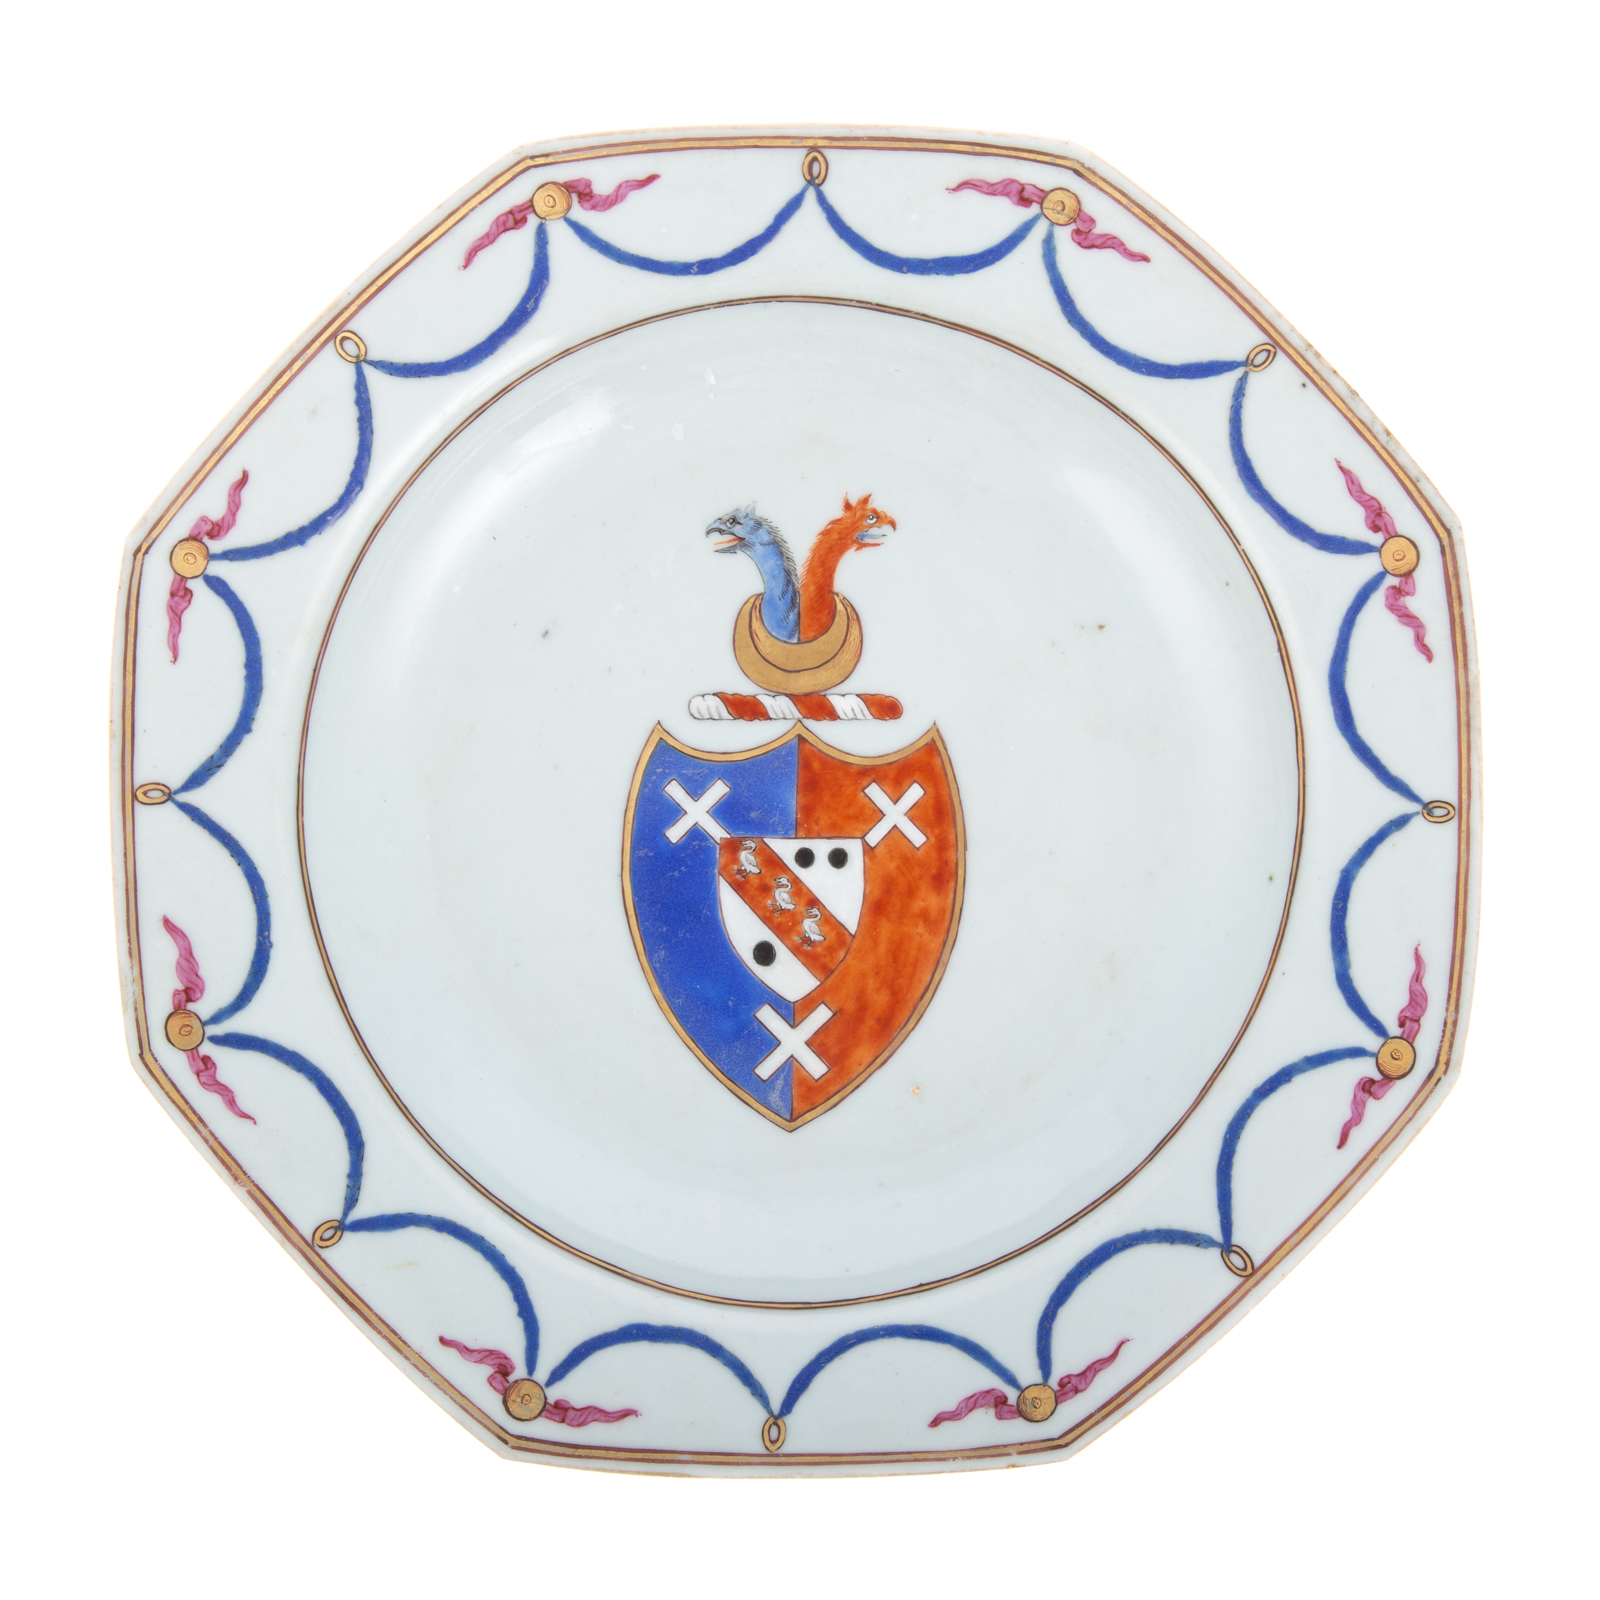 ENGLISH MARKET CHINESE EXPORT ARMORIAL 2eaf39